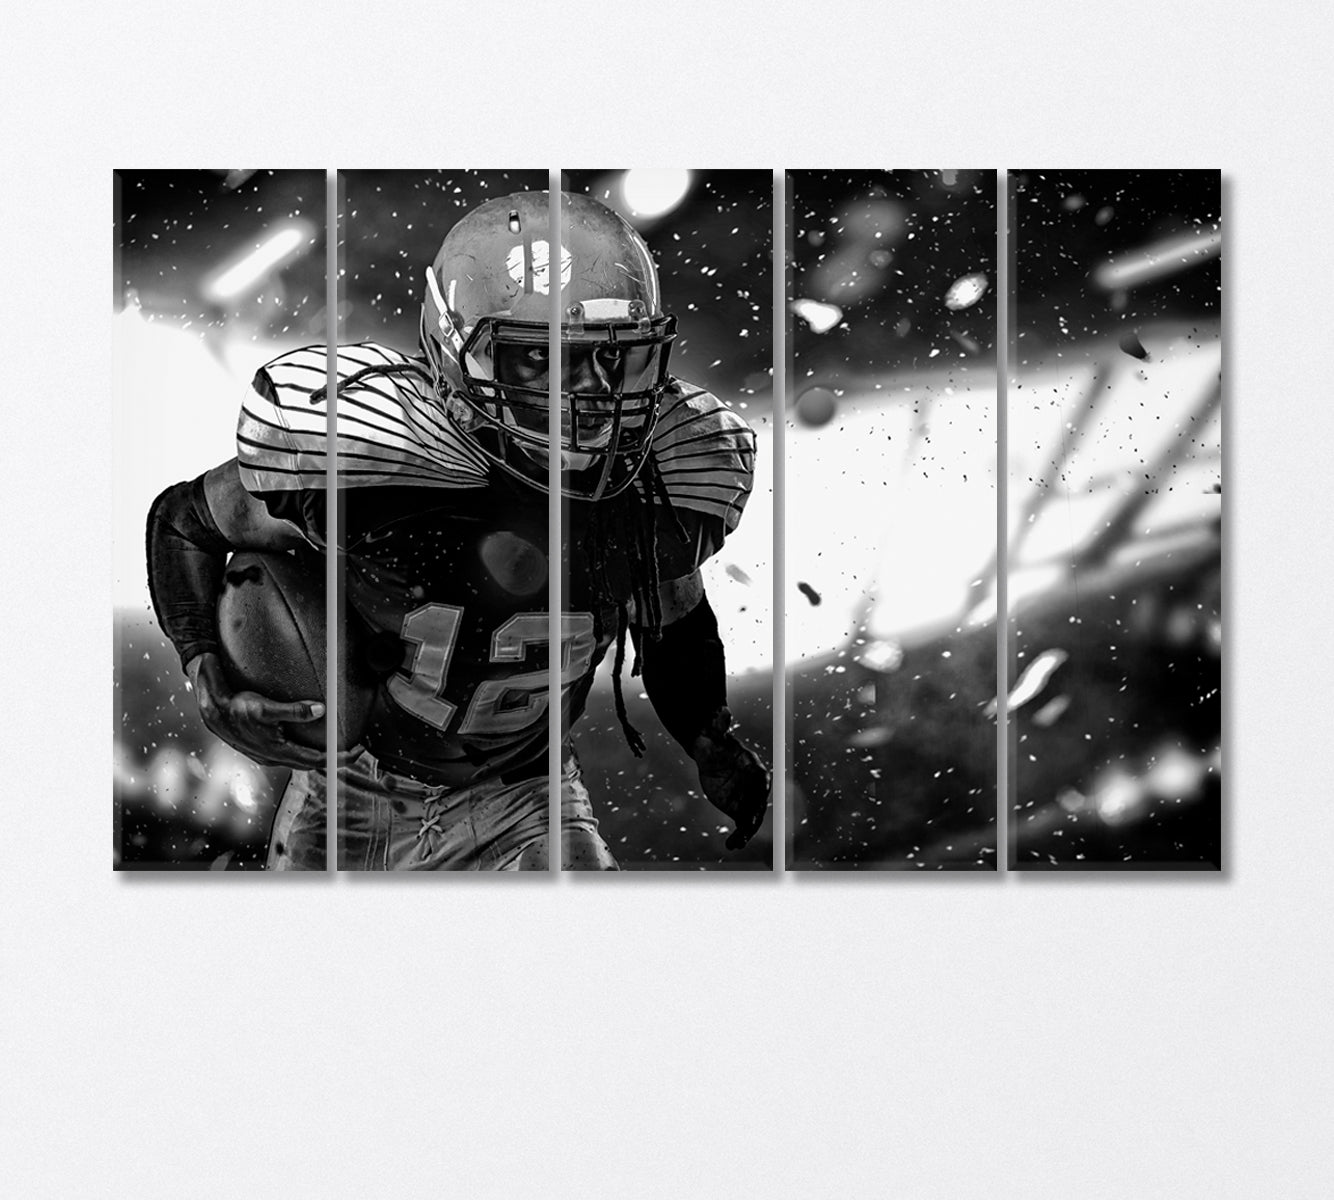 American Football Player in Black and White Canvas Print-Canvas Print-CetArt-5 Panels-36x24 inches-CetArt